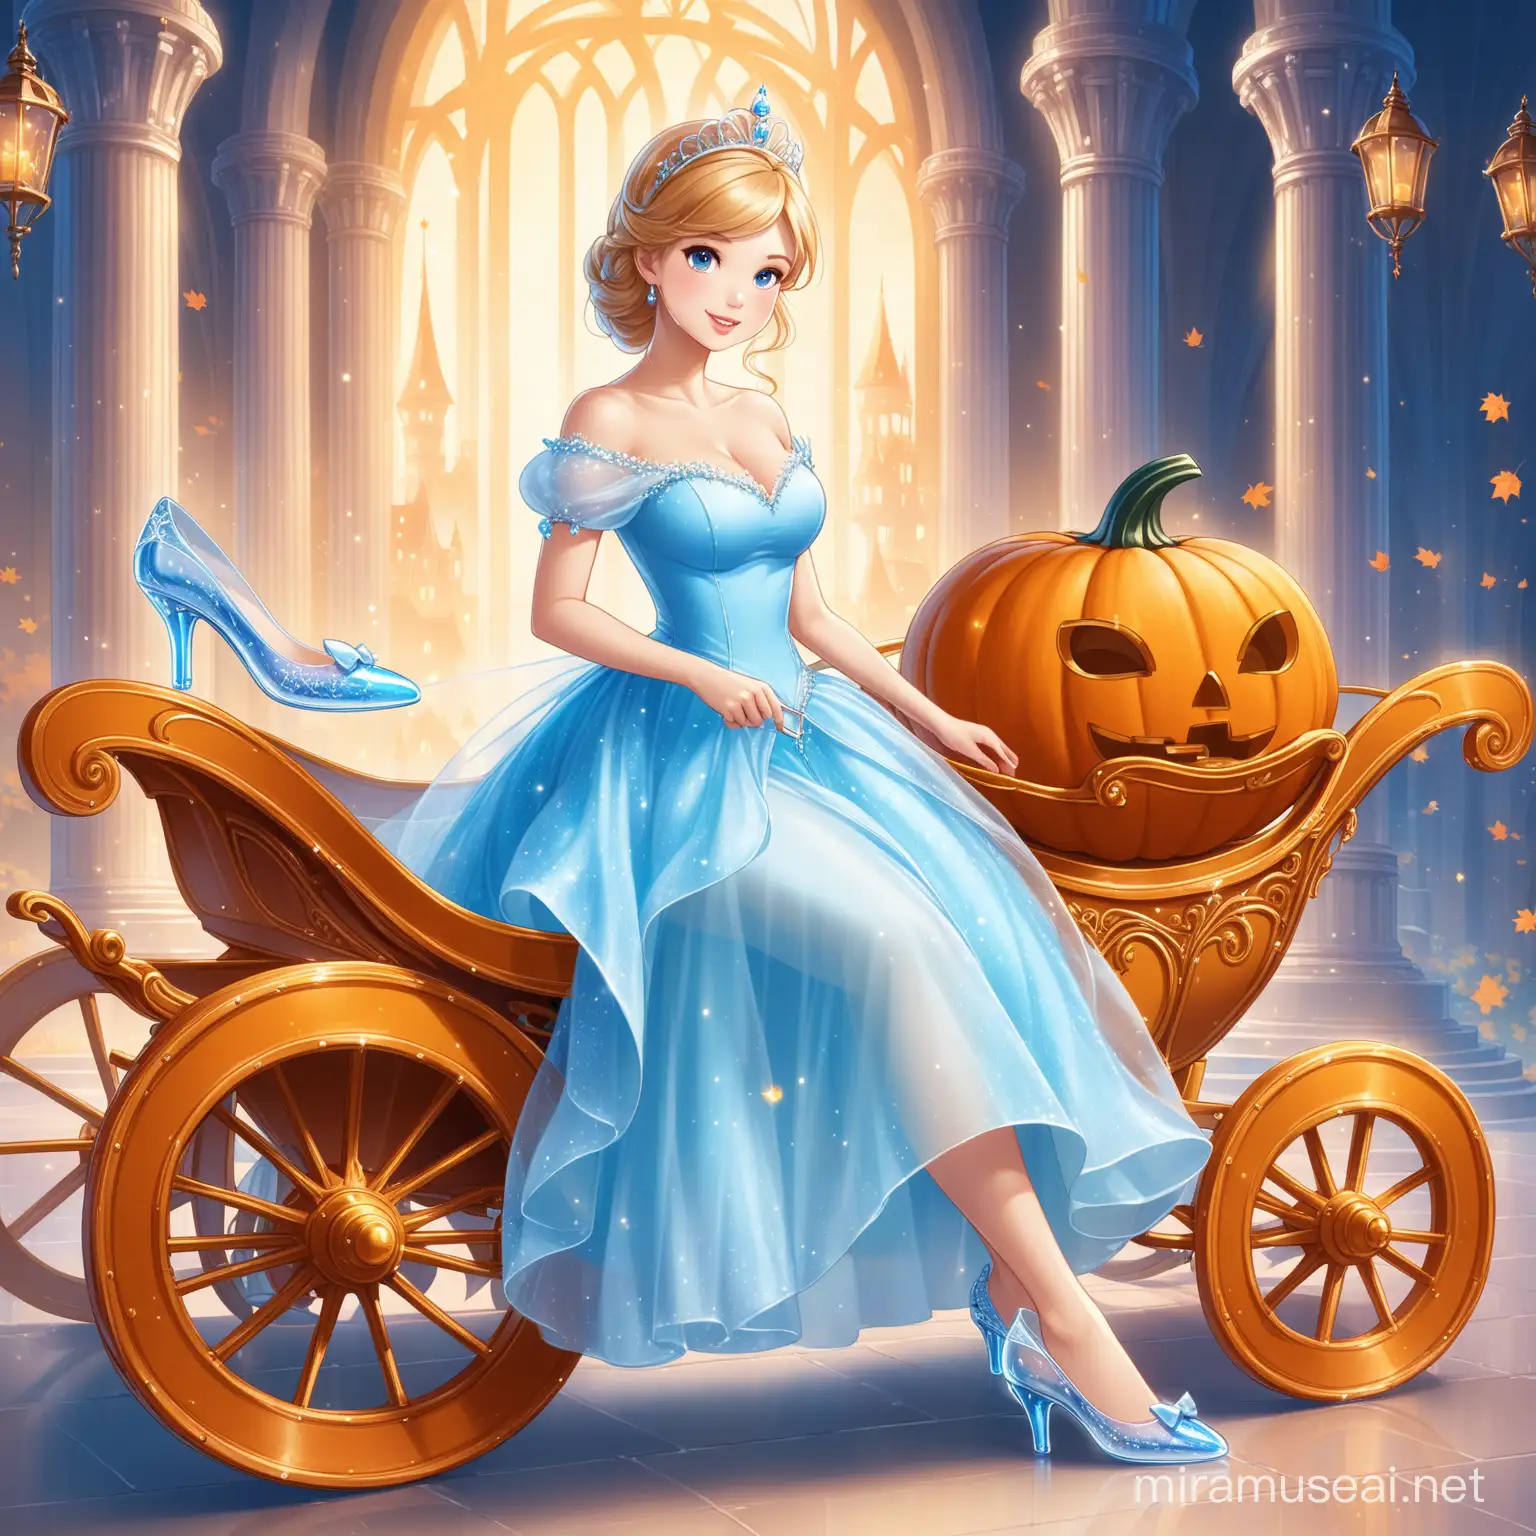 a girl like Cinderella with Glass slipper and pumpkin carriage. 